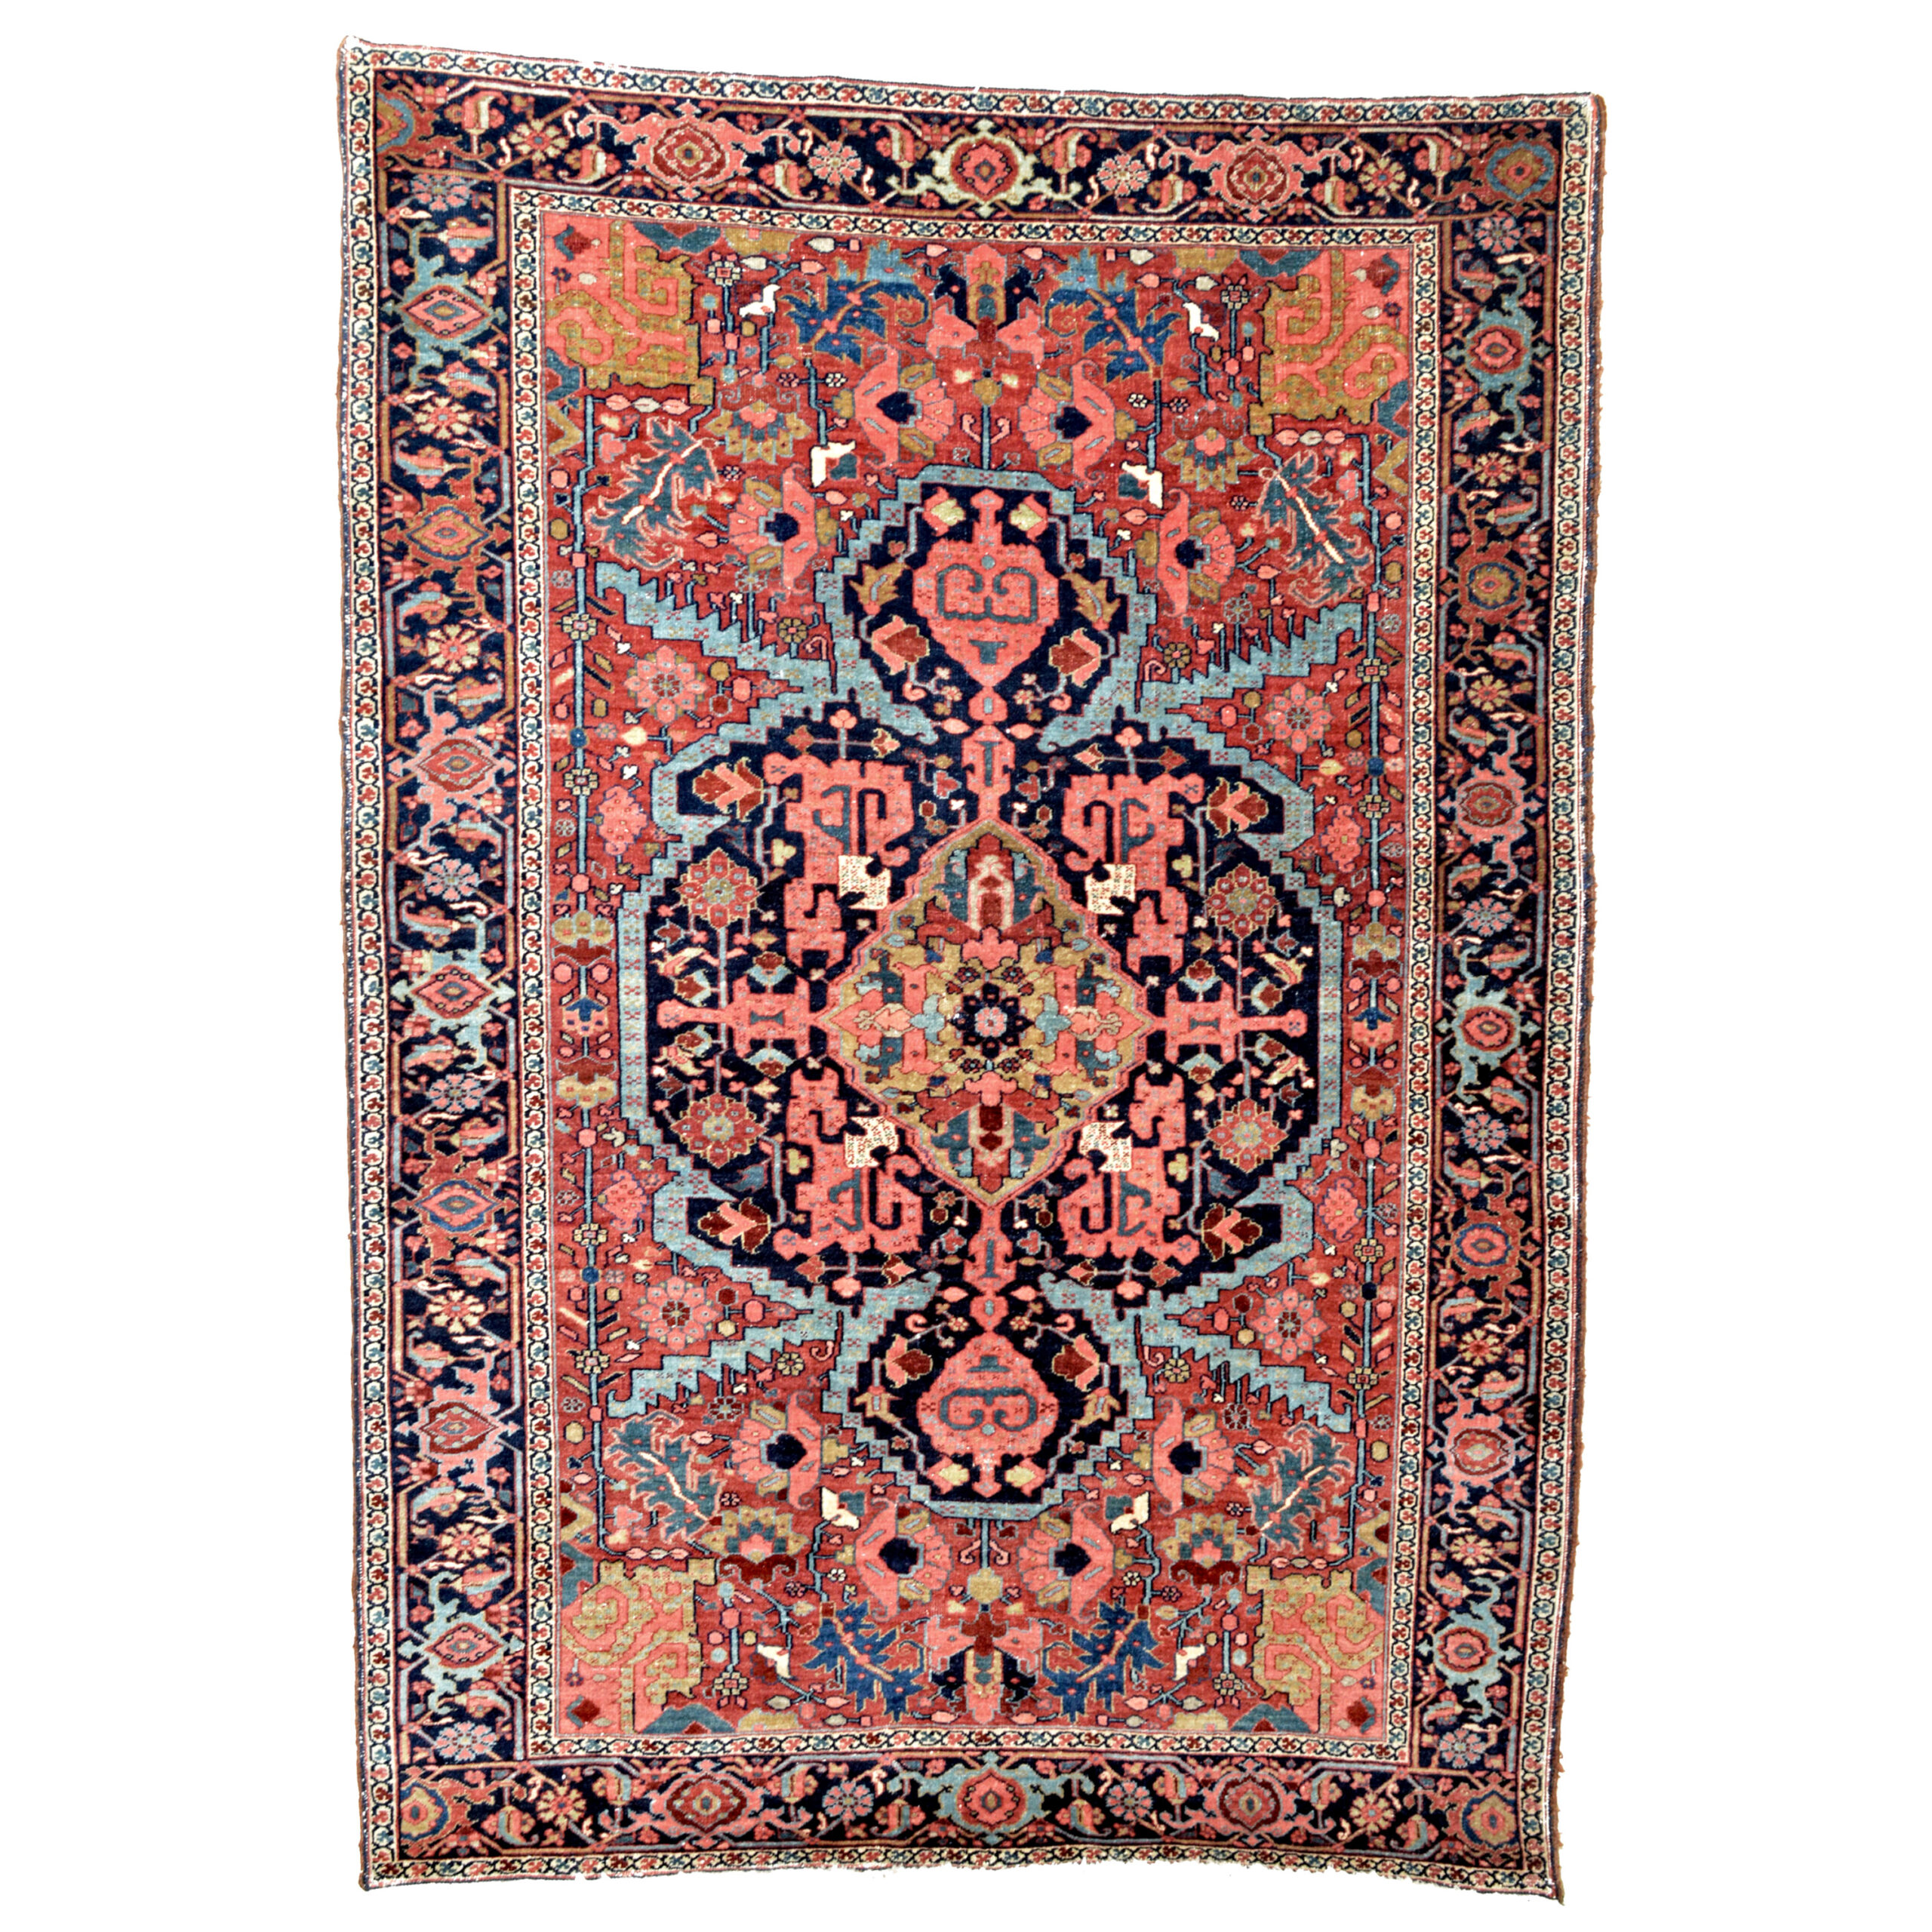 A finely woven antique Persian Heriz rug of the age and caliber where Heriz rugs are often referred to colloquially as antique "Serapi" rugs. Heriz area rugs with a medallion of this style are often attributed to the village of Bakshaish, however, the dense weave and articulation of the motifs suggest this rug was woven in Heriz itself. The brick red field is decorated with a navy blue medallion with coral and camel highlights and framed by a sky blue banding. A navy blue Turtle border frames the field. Northwest Persia, circa 1900. Douglas Stock Gallery is one of America's most selective dealers in antique Oriental rugs. Antique rugs Boston,Brookline, Newton, Wellesley, Natick,MA area, antique rugs New England, antique rugs New York by appointment, antique rugs Washington DC